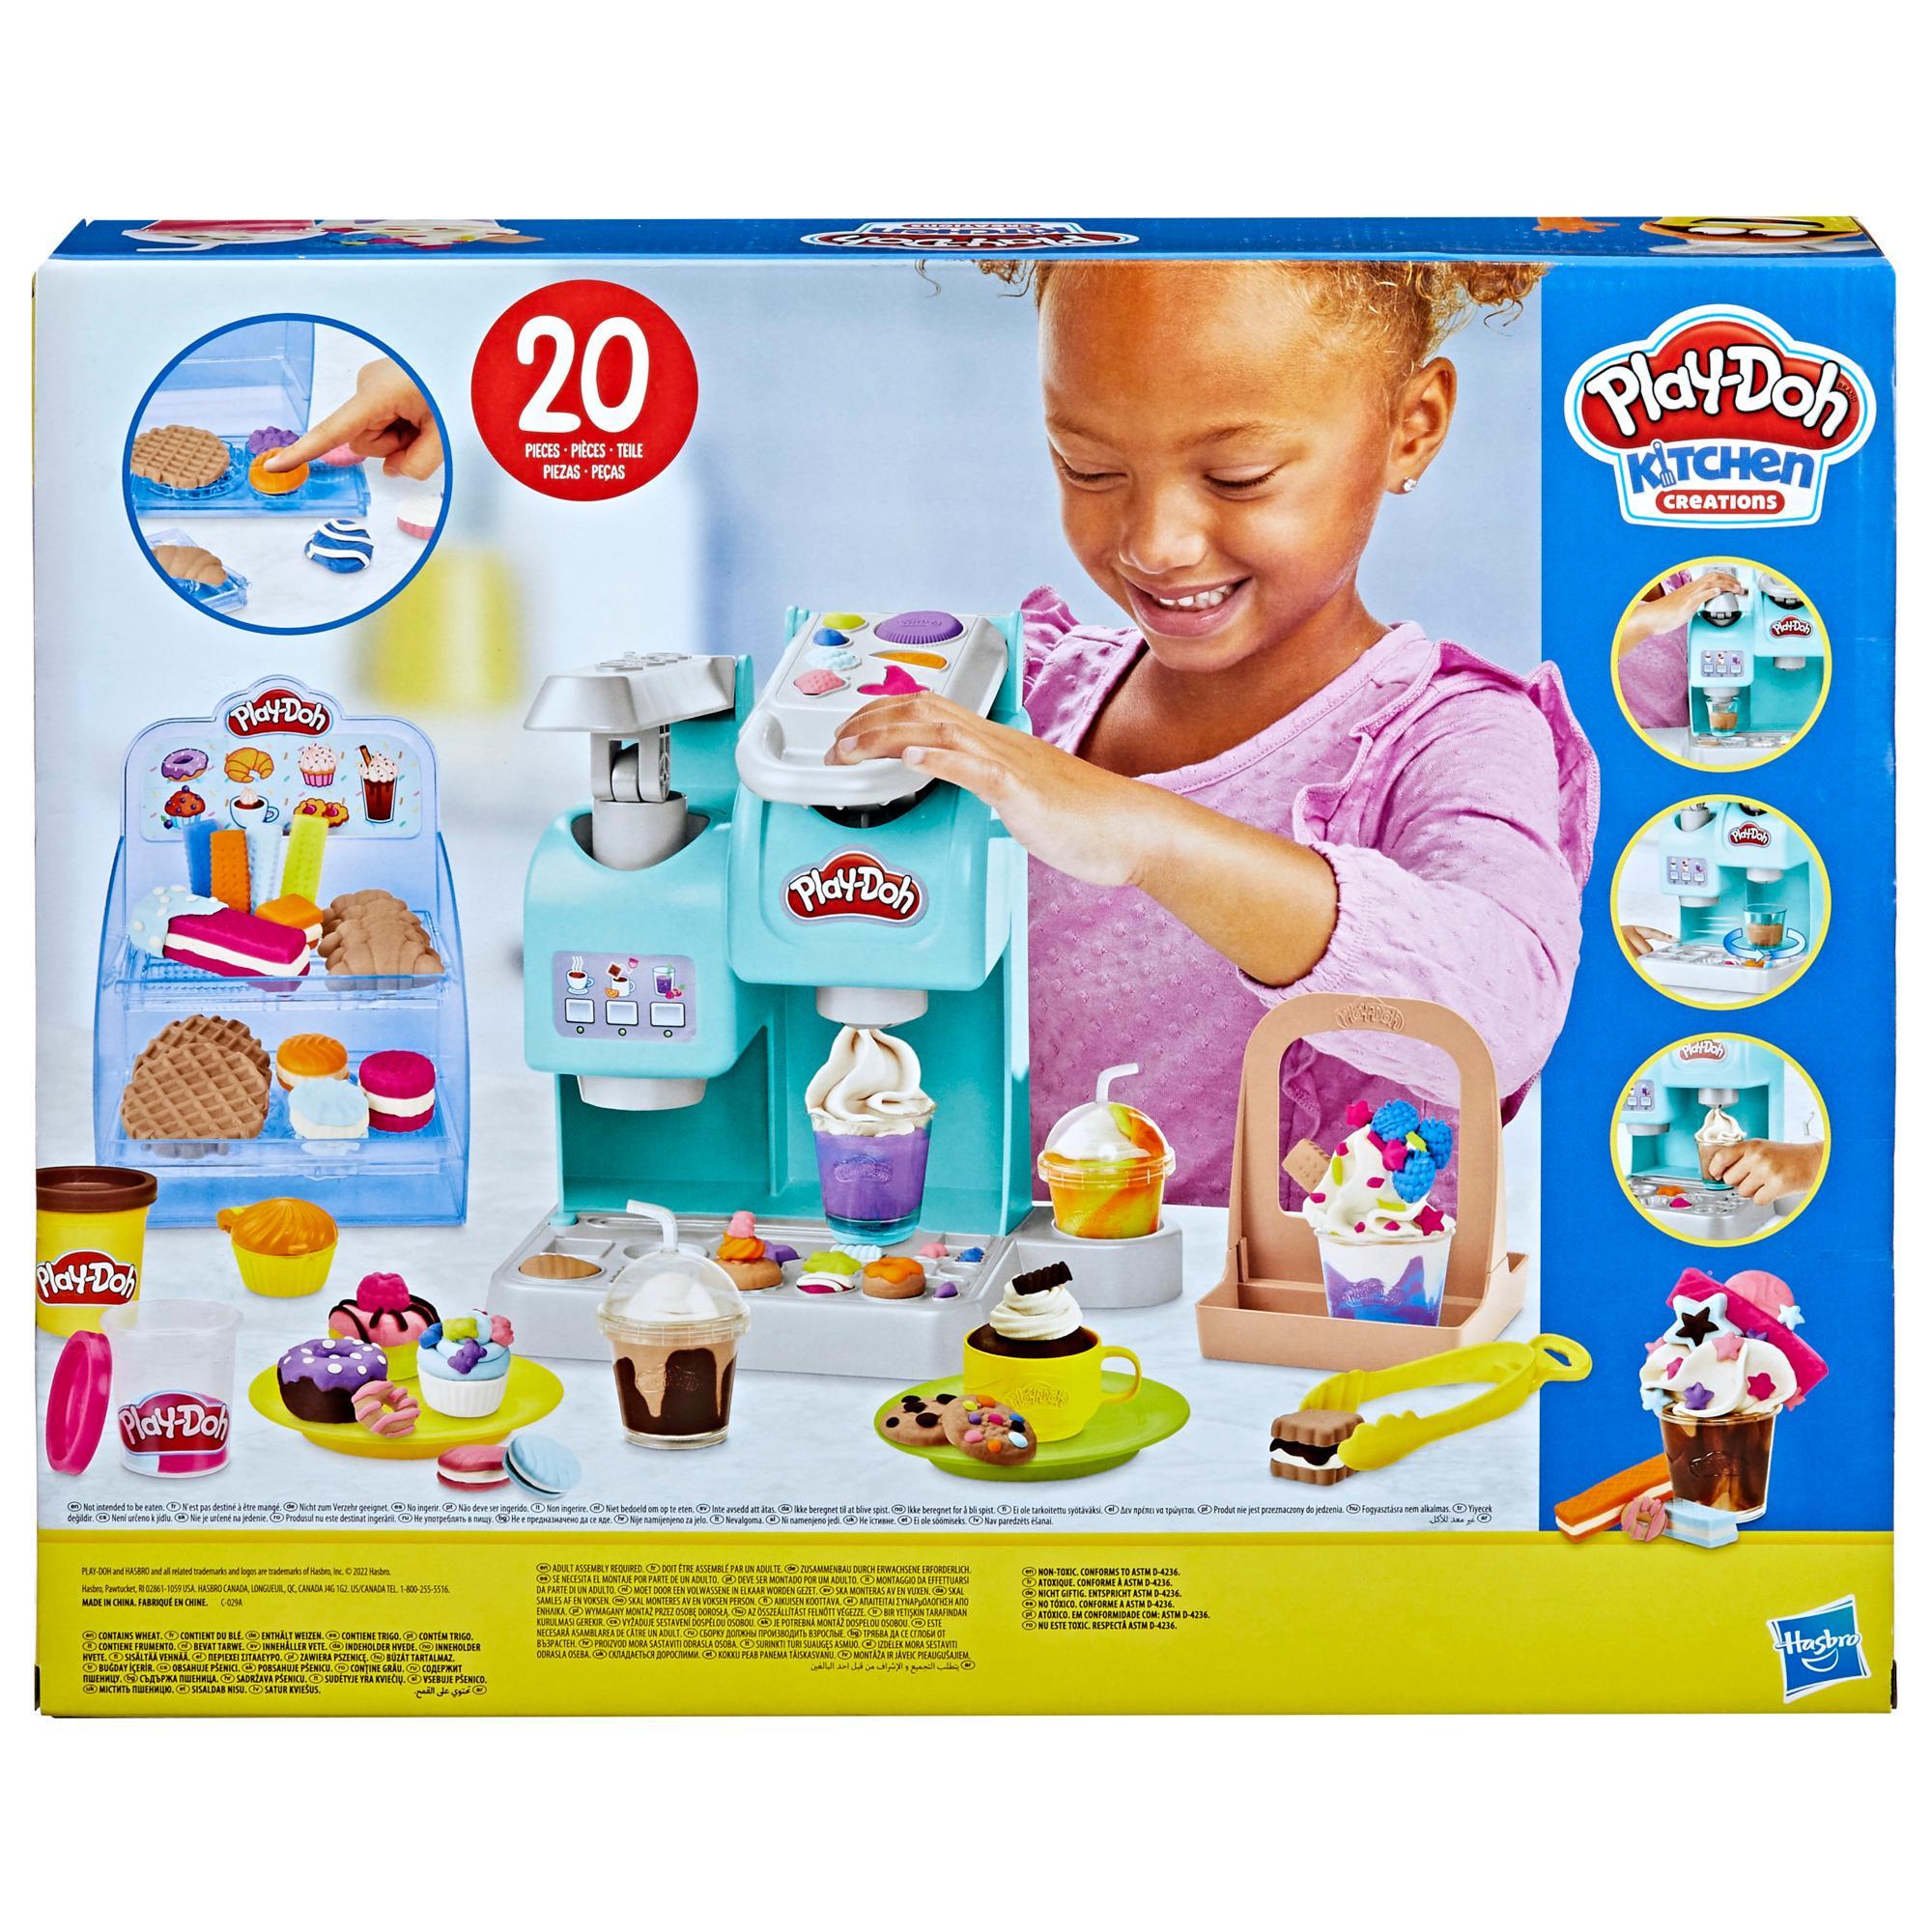 PLAY-DOH GRANDE CAFETERIA COLORIDA product thumbnail 1